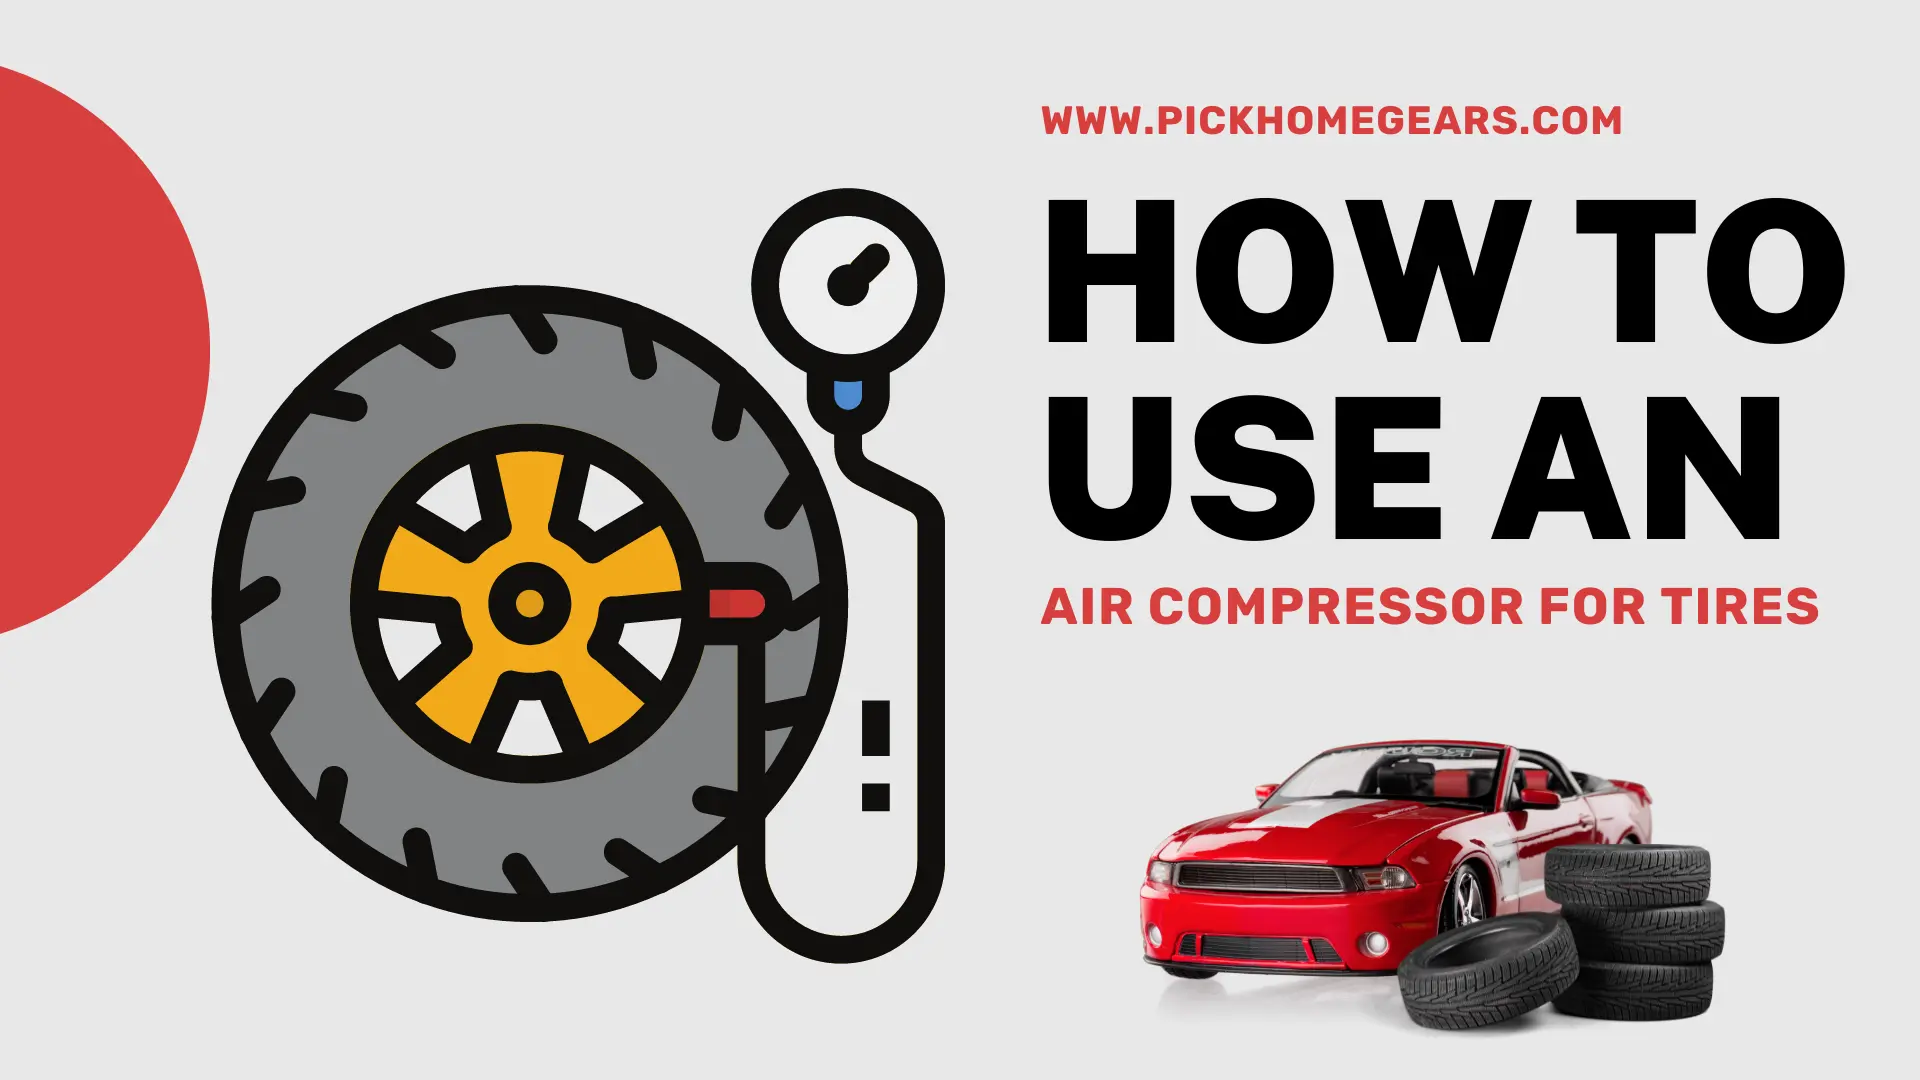 How to Use an Air Compressor for Tires